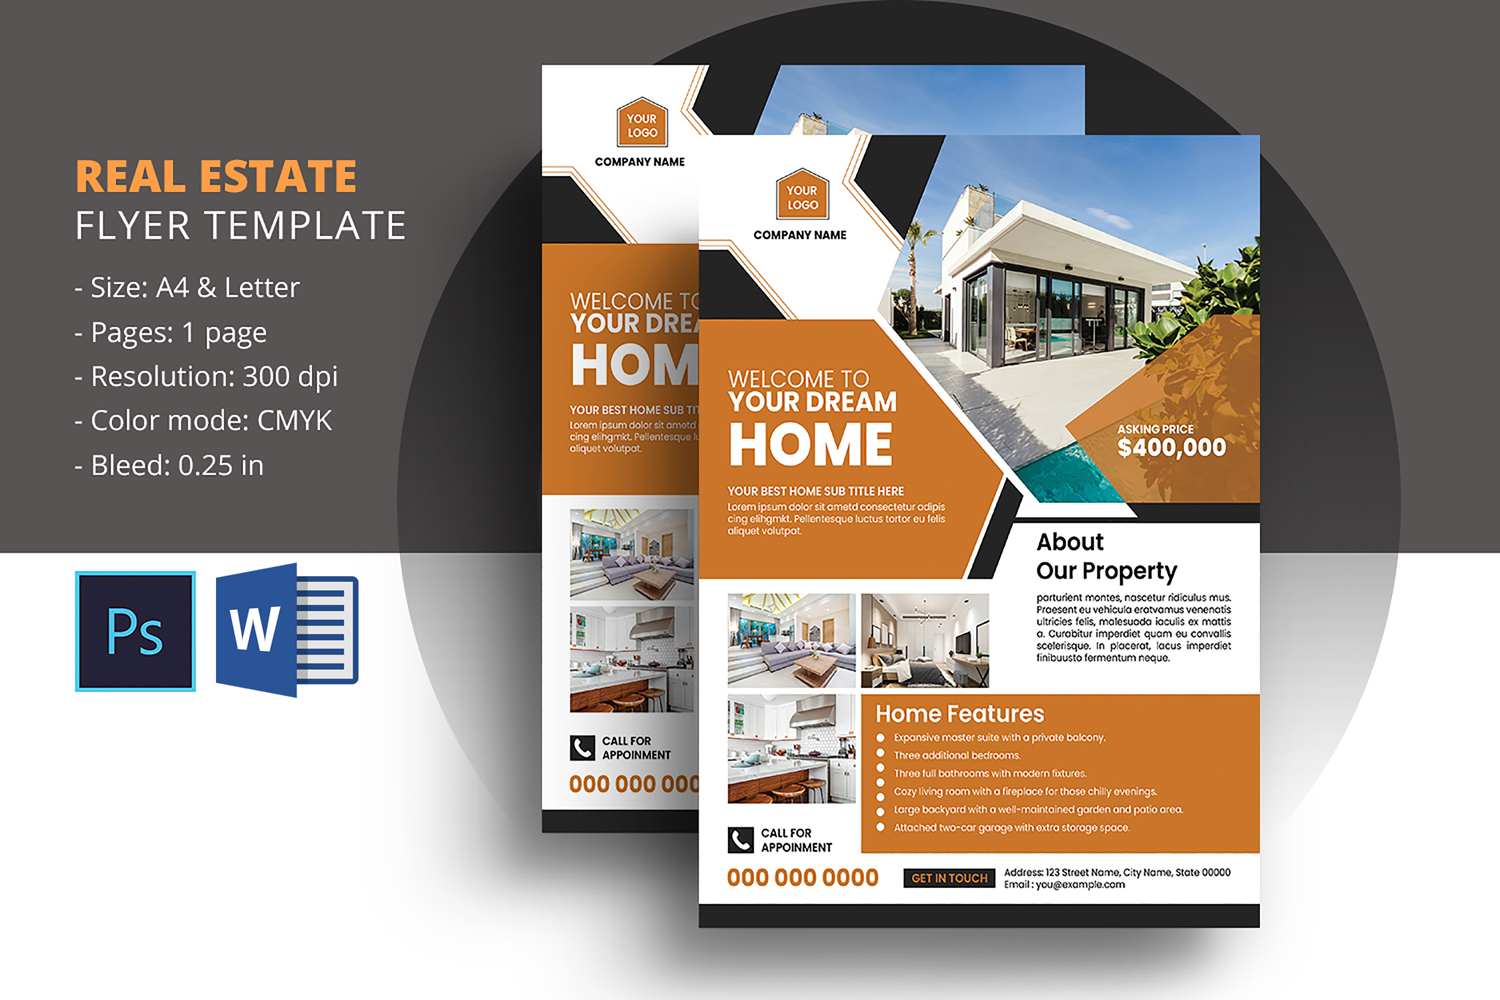 Real Estate Agency Flyer Template. Ms Word and Photoshop Template